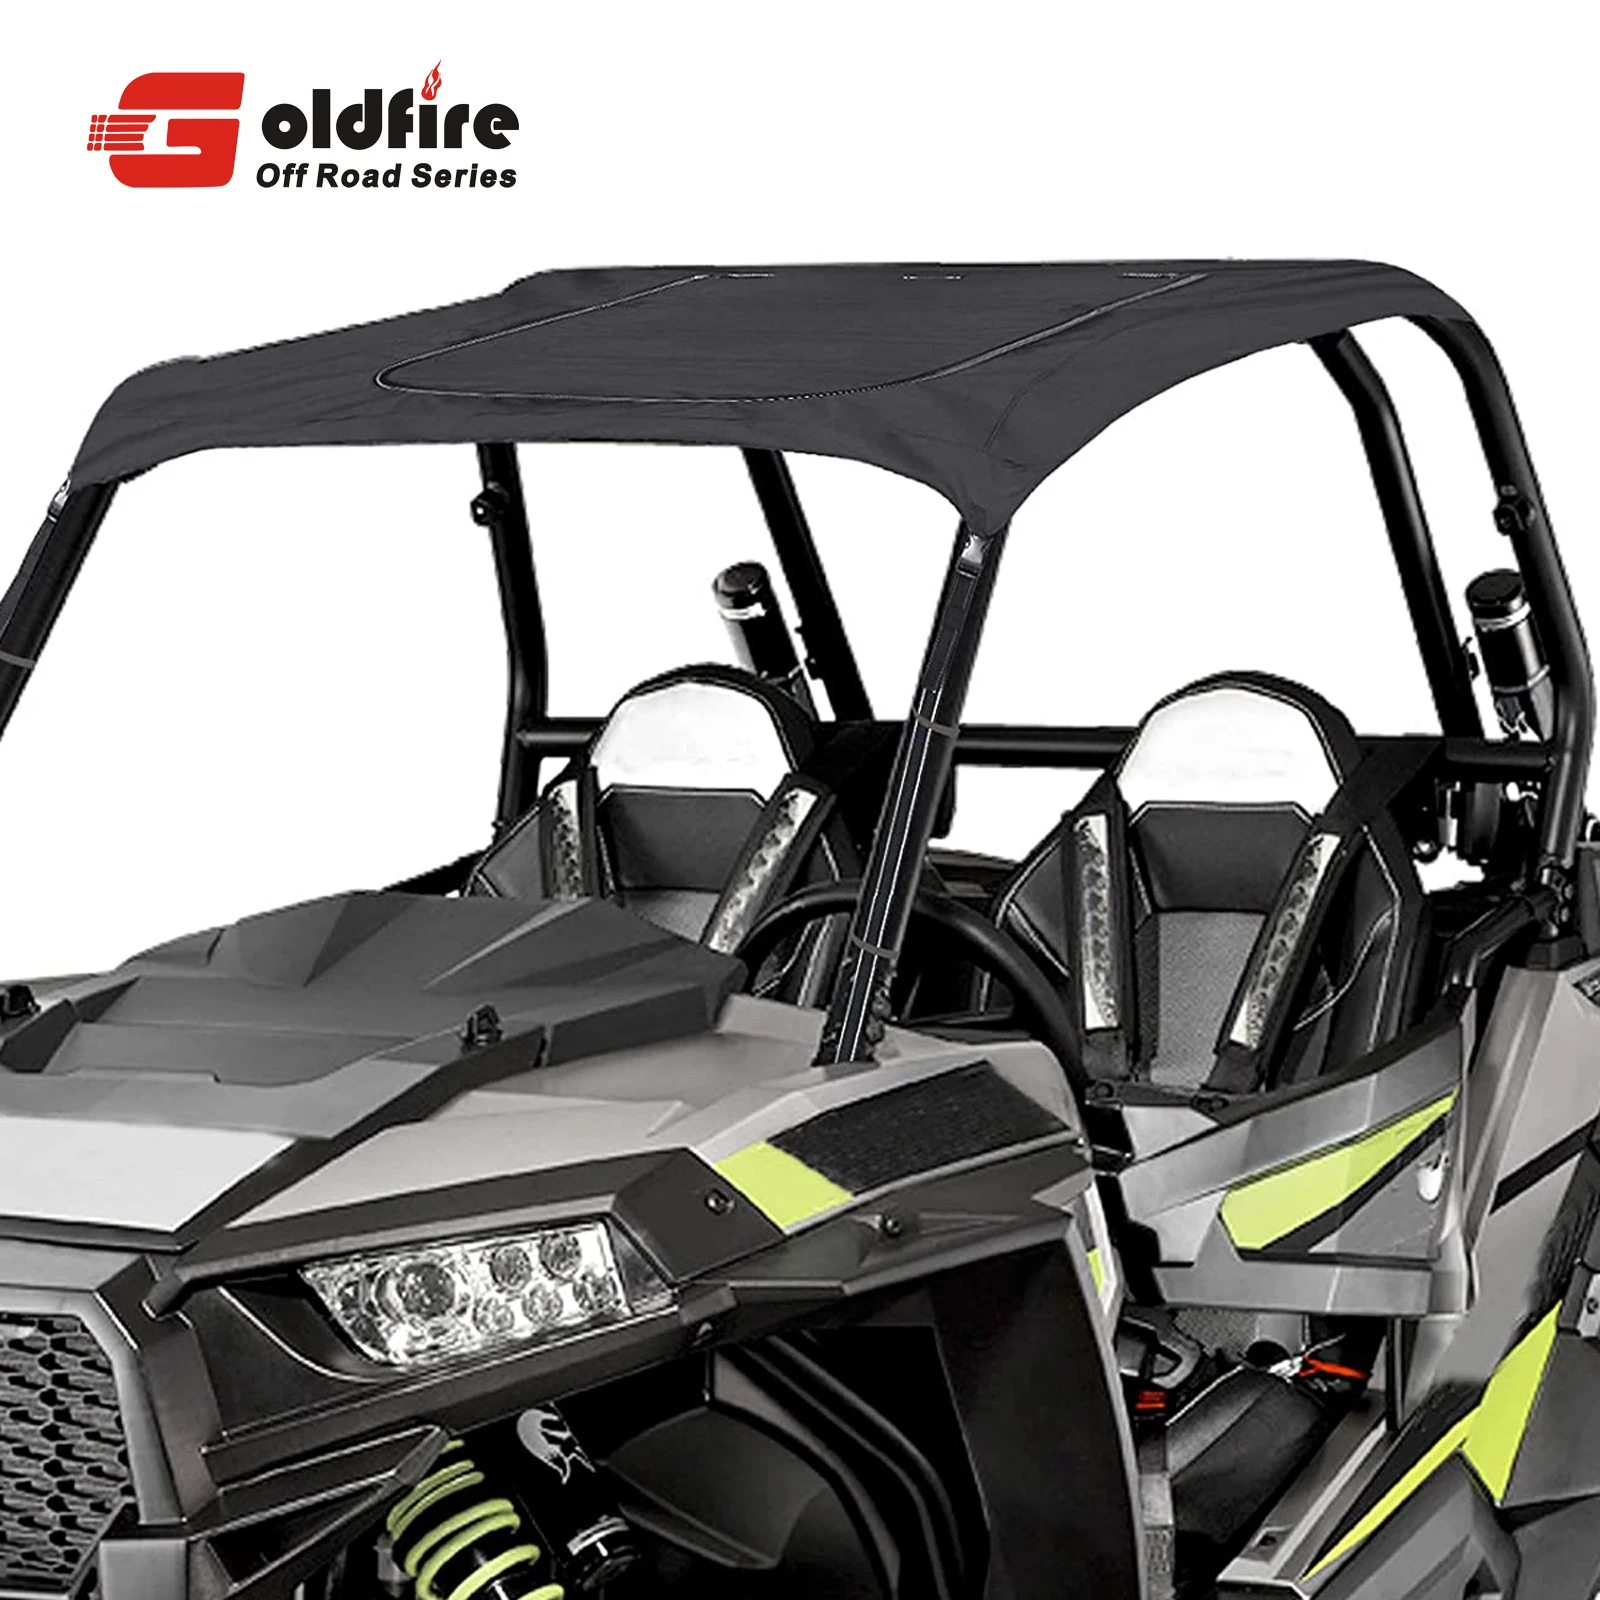 UTV Convertible RZR Soft Roof RZR Soft Top Roof Compatible with 2014-2019 Polaris RZR XP 1000 and Turbo RZR 900 for 2 Seater